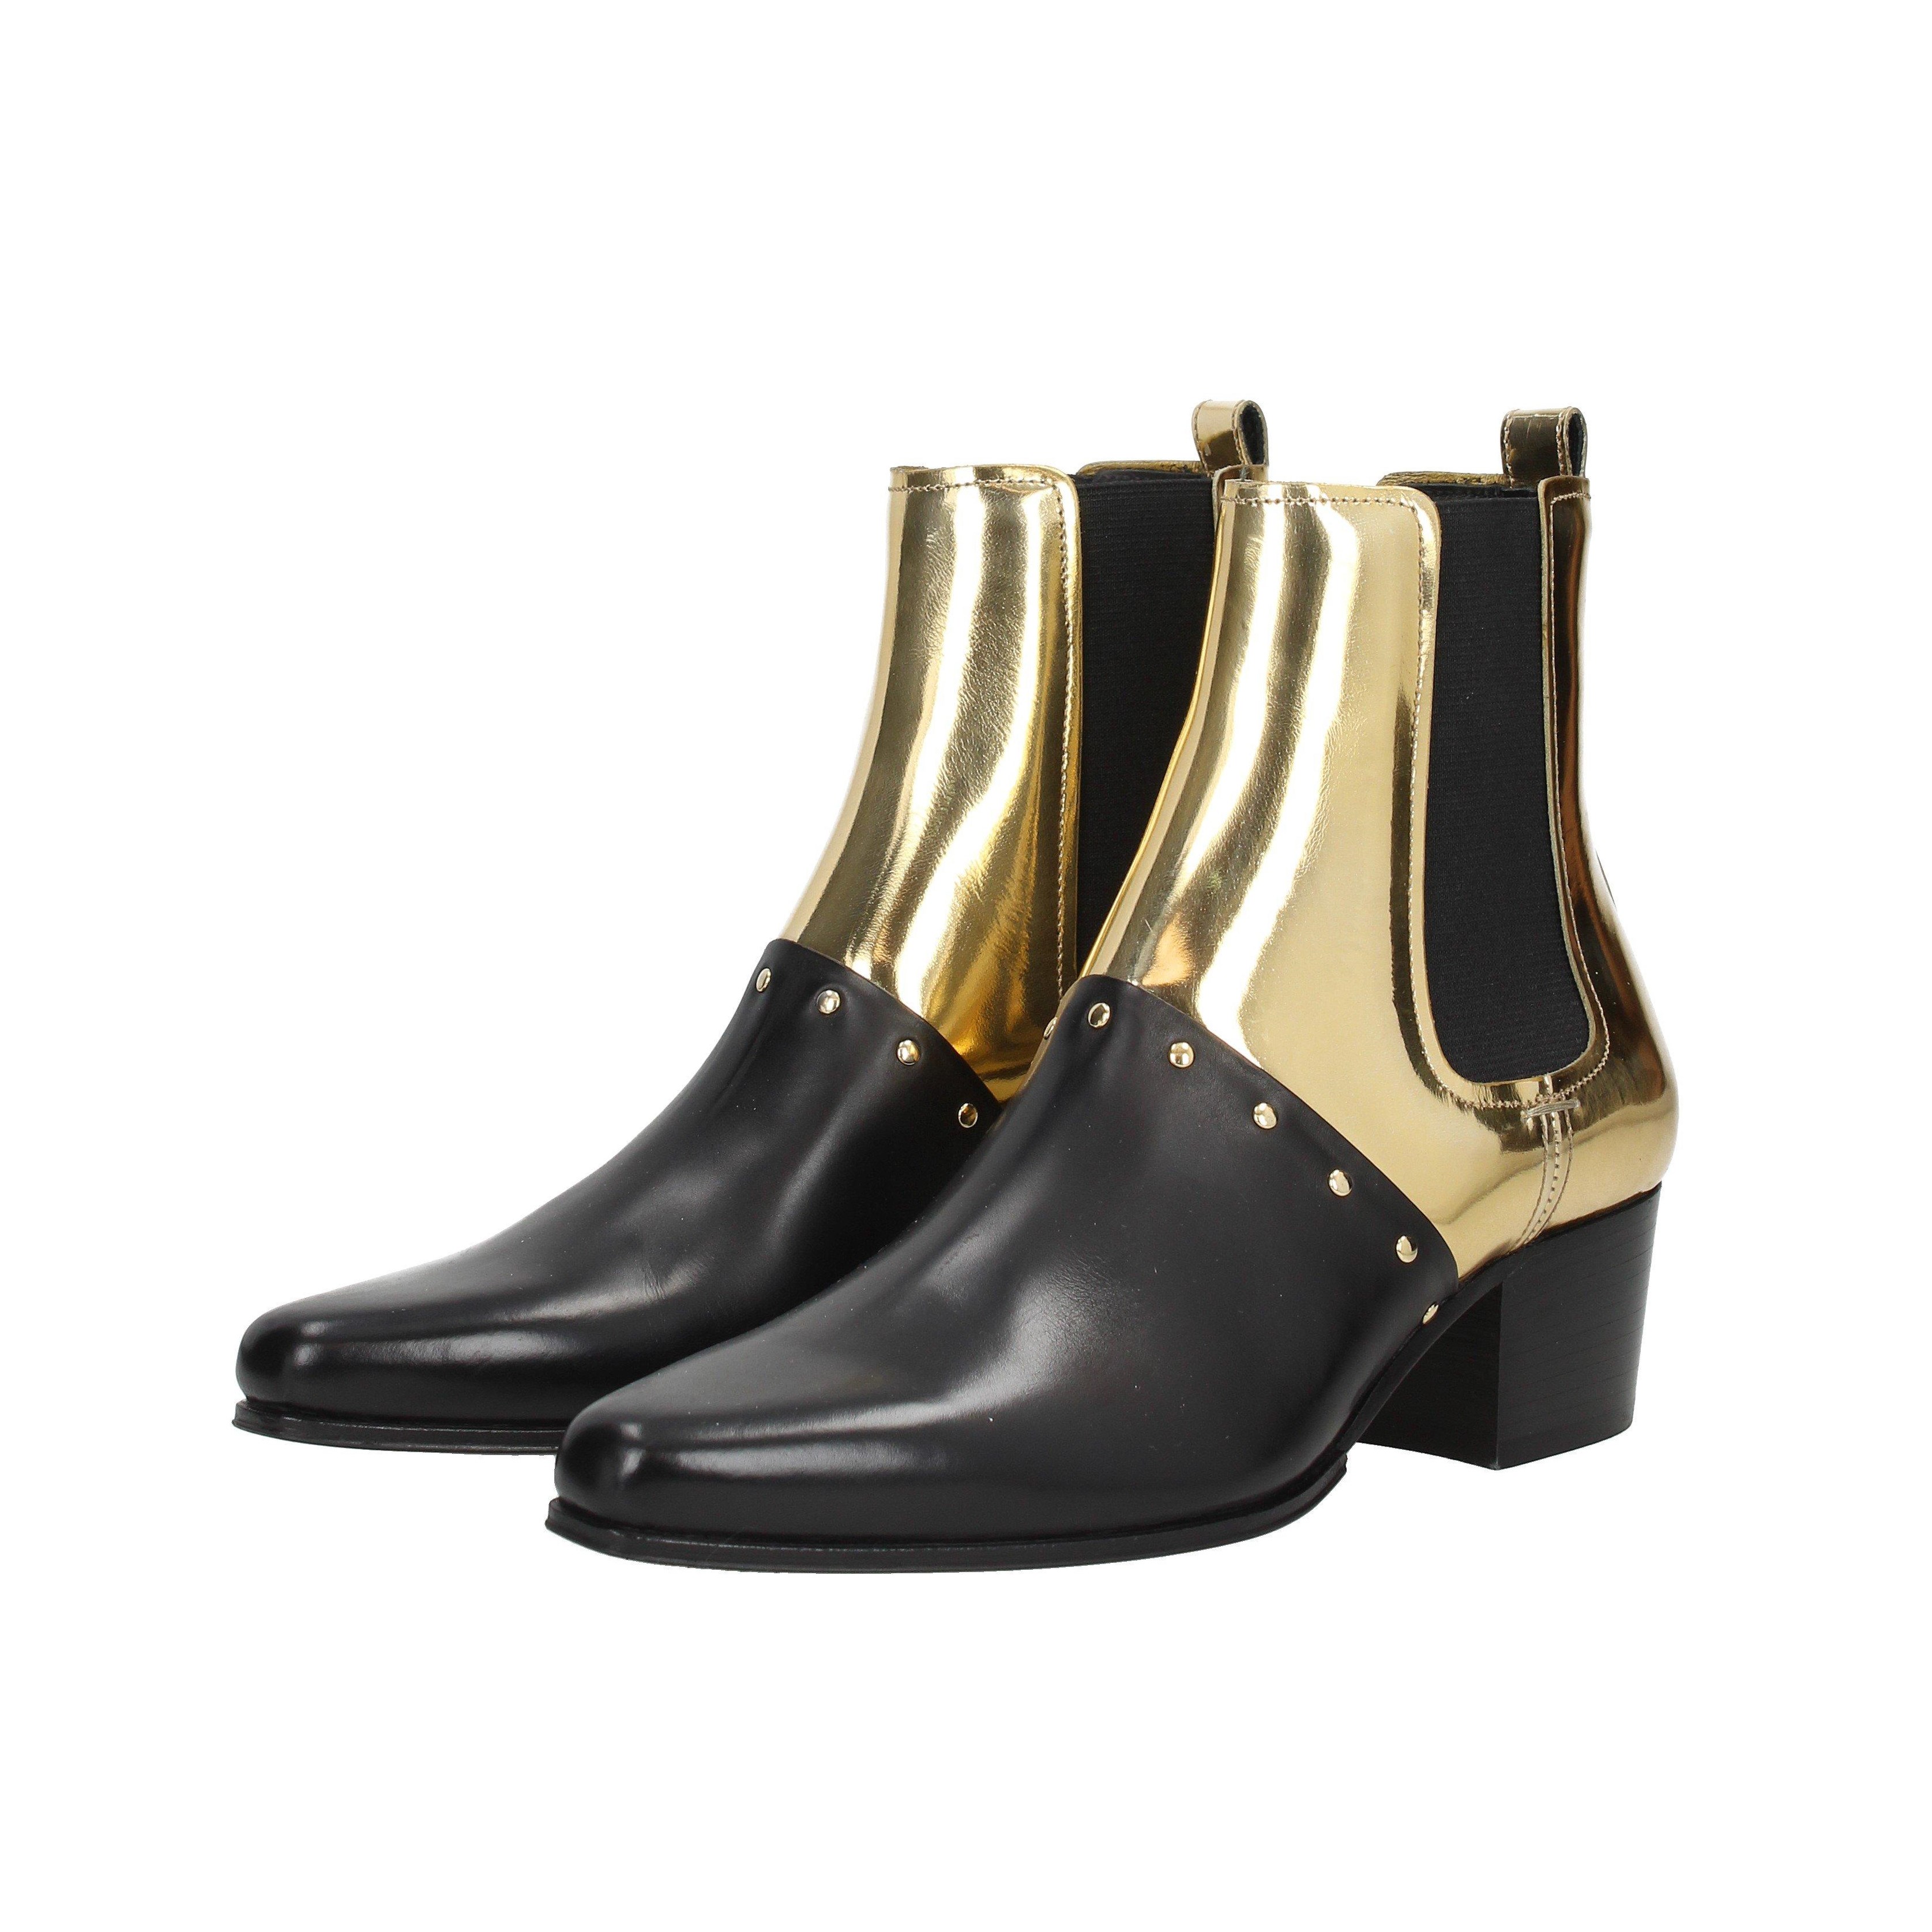 Føde Allieret format Black and Gold Chelsea Boots Block Heel Rivets Ankle Booties |FSJshoes